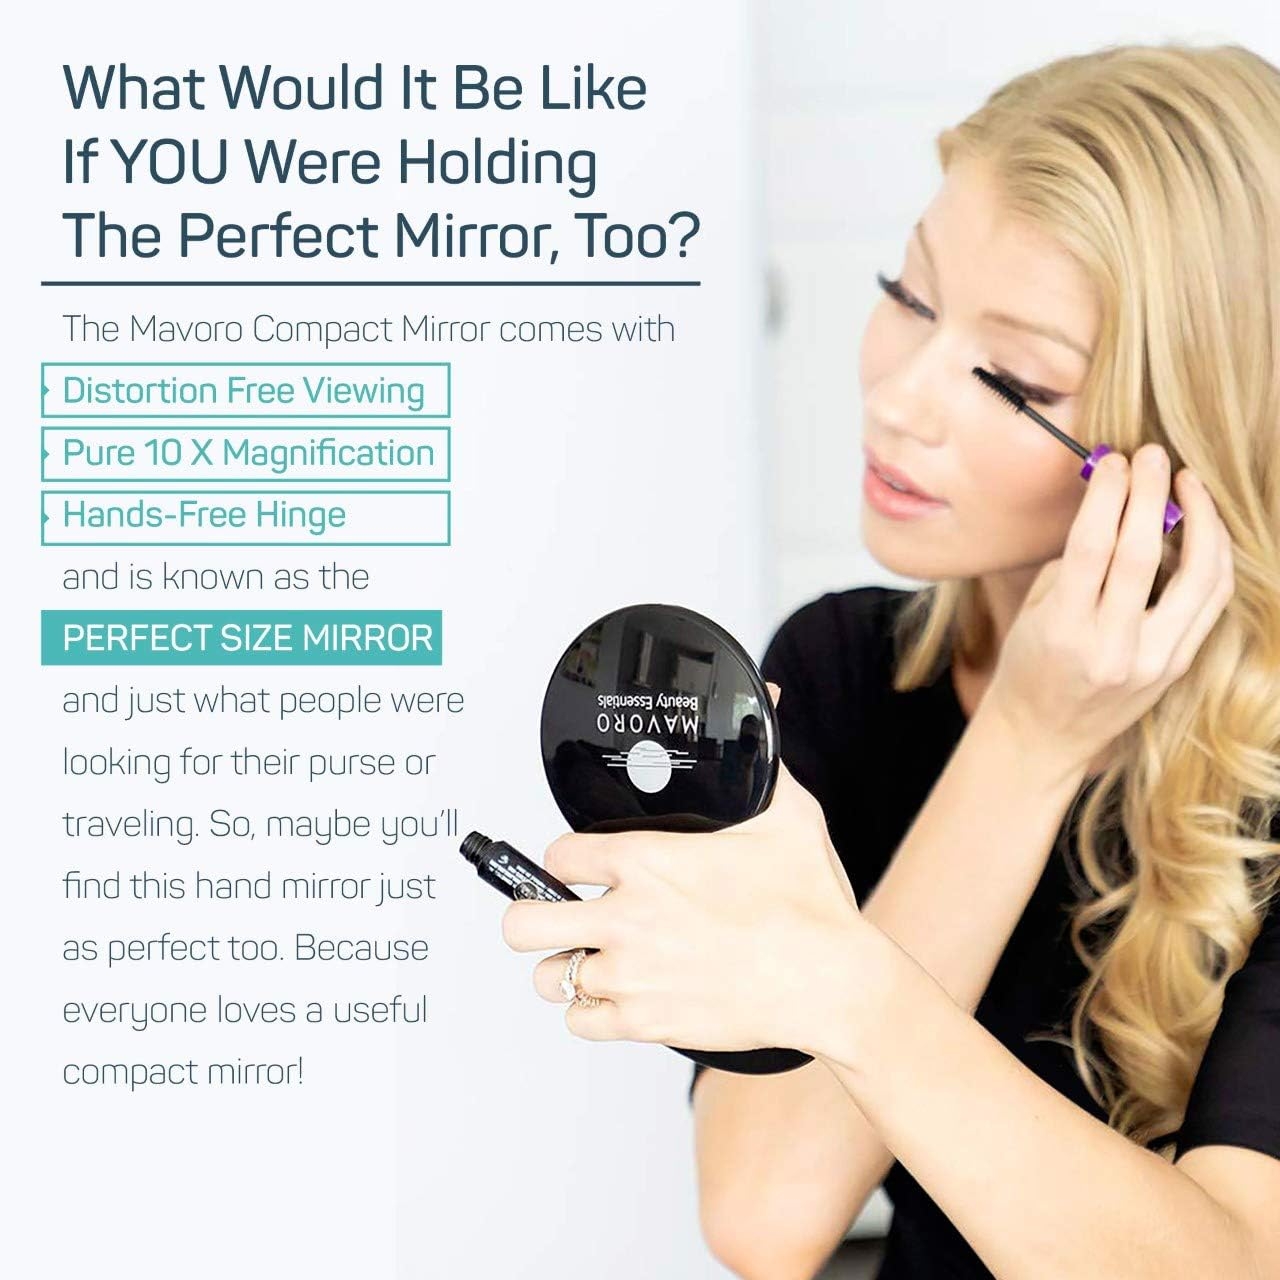 Magnifying Compact Mirror for Purses, 1x/10x Magnification – Double Sided Travel Makeup Mirror, 4 Inch Small Pocket or Purse Mirror. Distortion Free Folding Portable Compact Mirrors (Black)